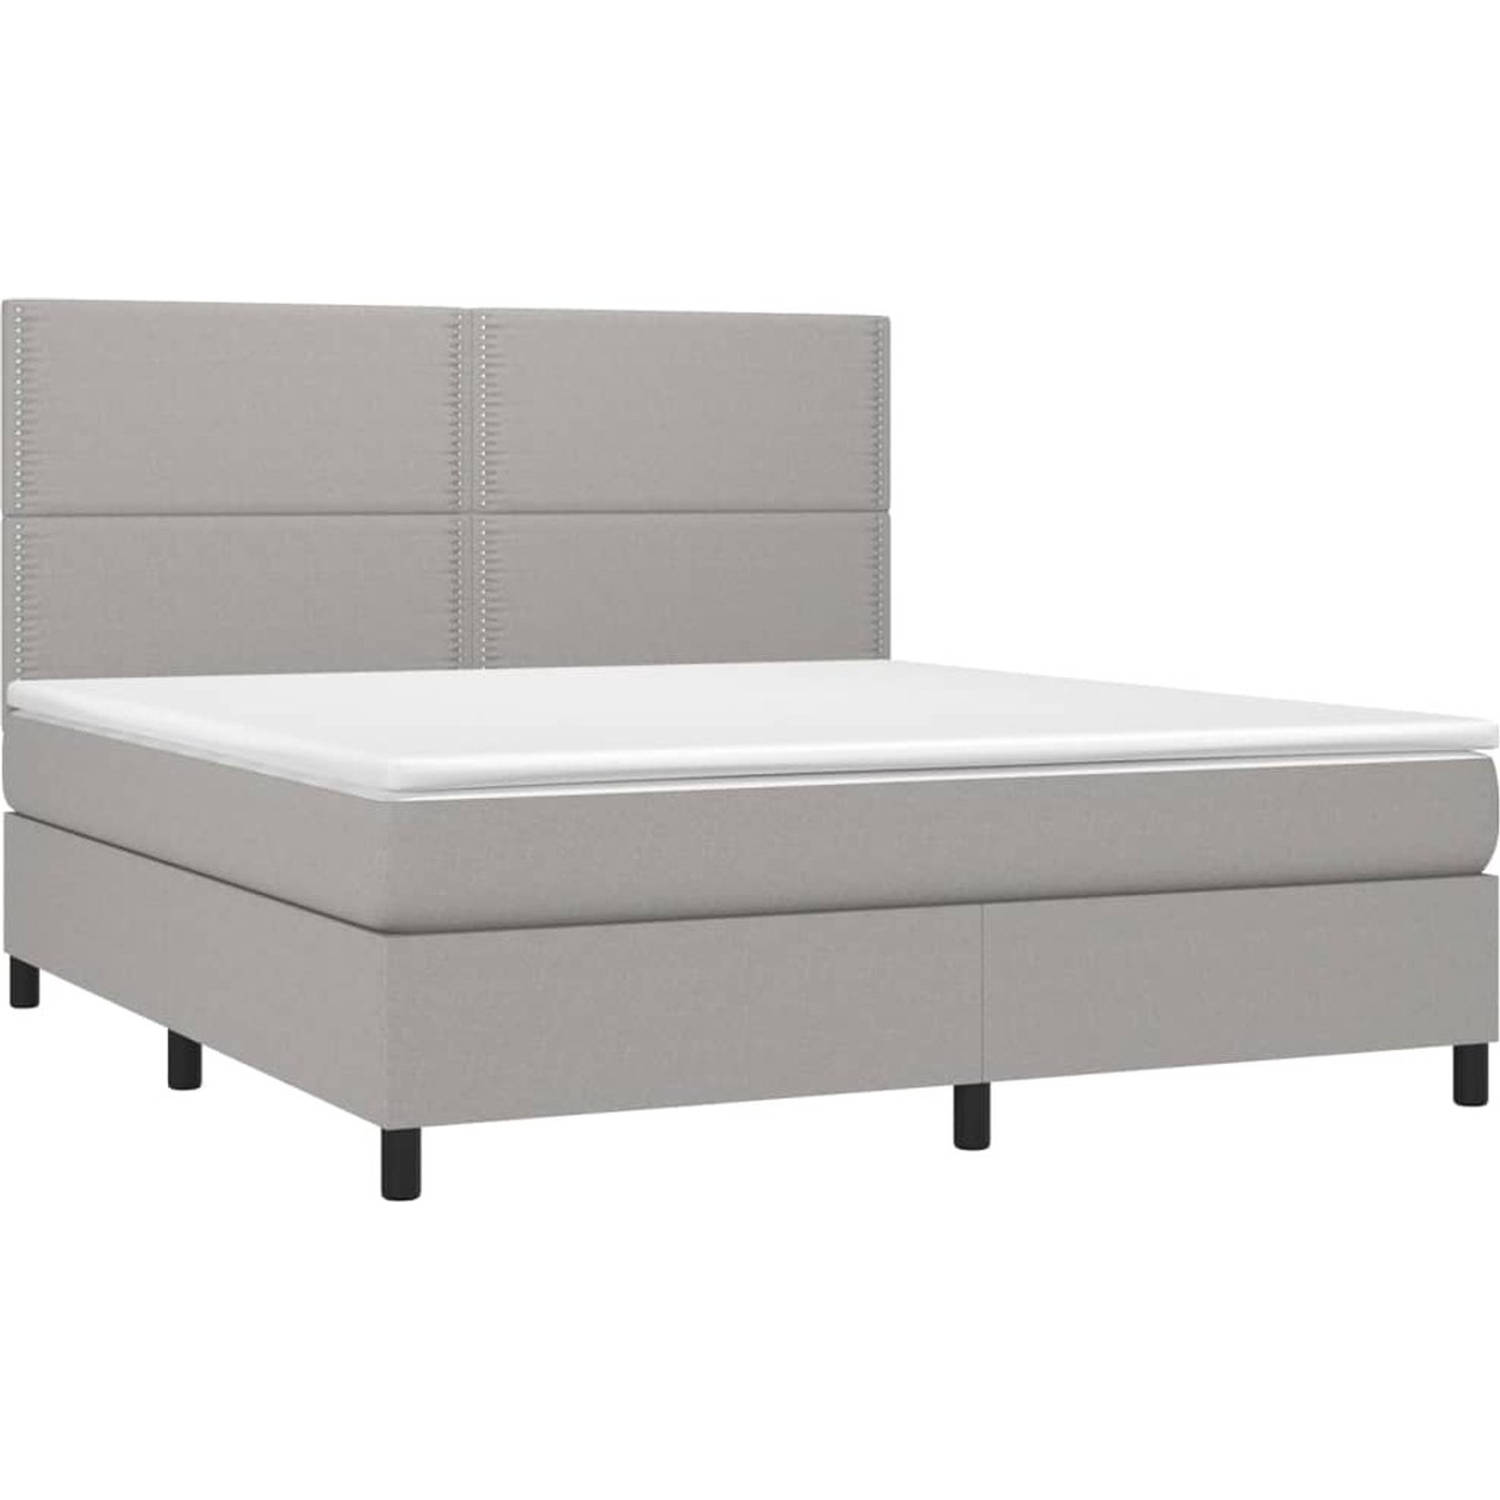 The Living Store Bed - Boxspring LED - 203 x 180 x 118/128 cm - Lichtgrijs